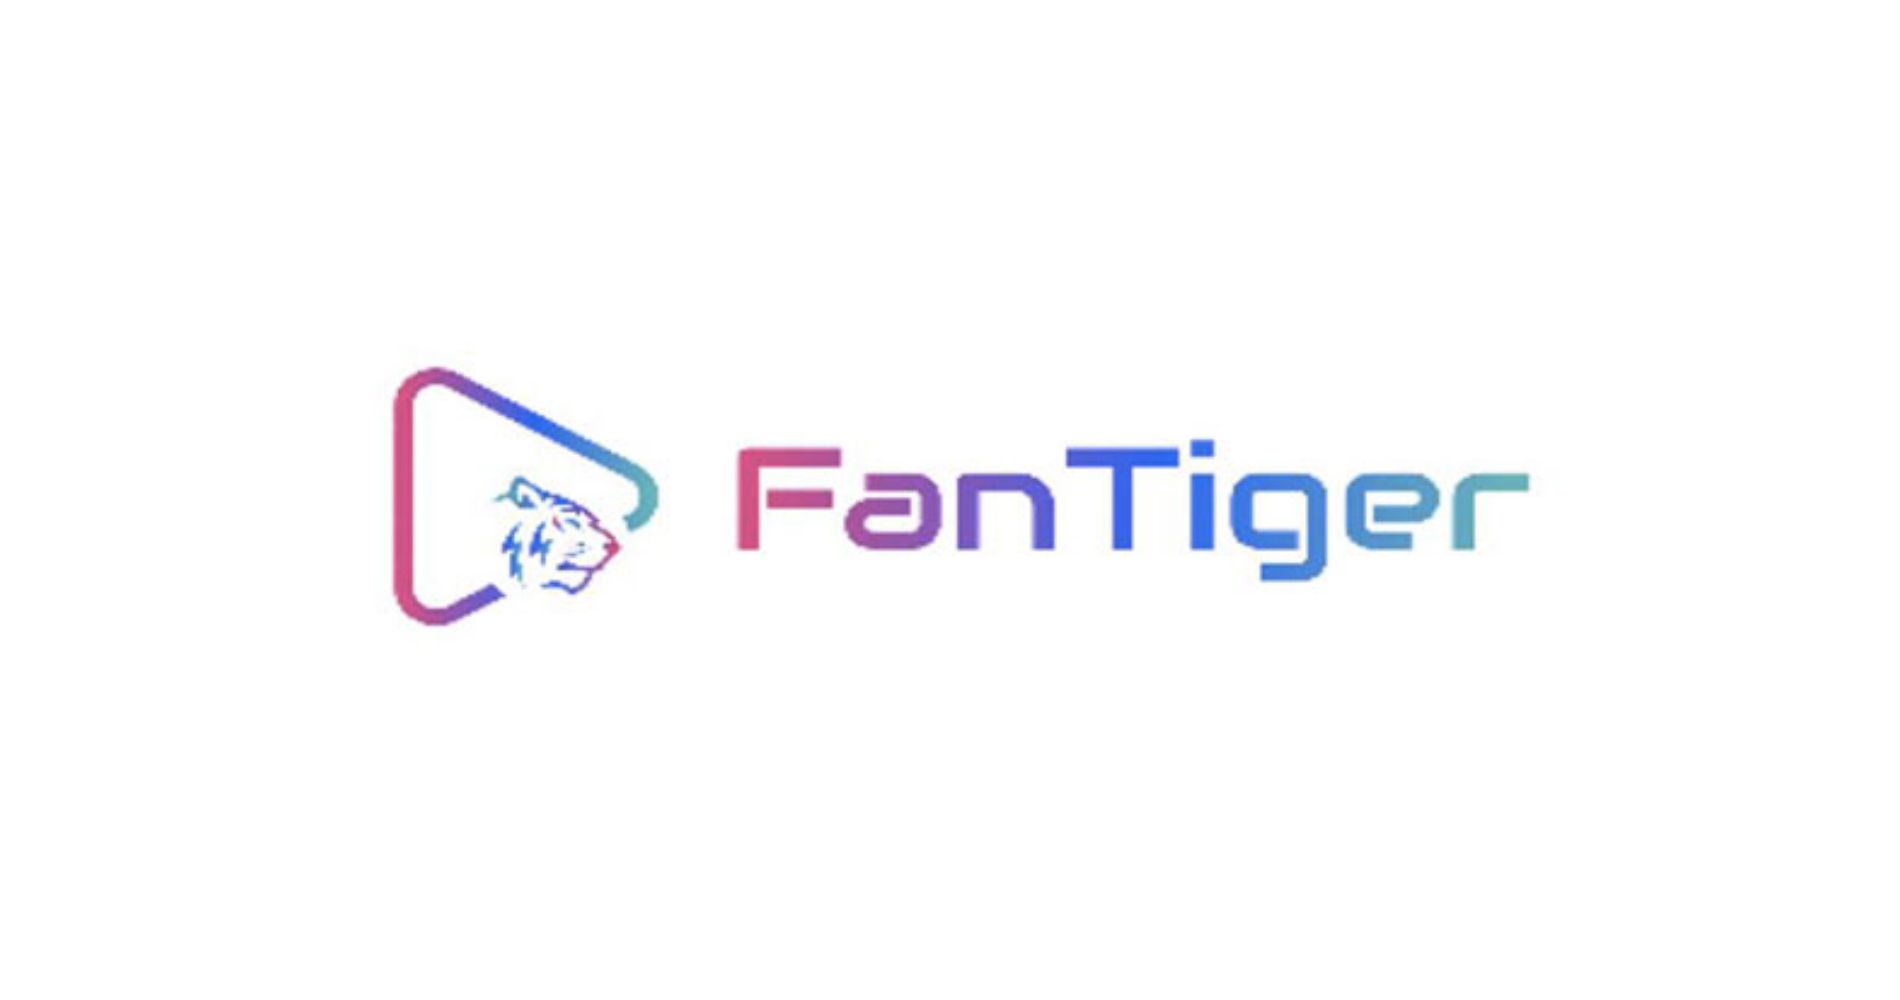 FanTiger becomes the first  NFT platform to achieve this unique